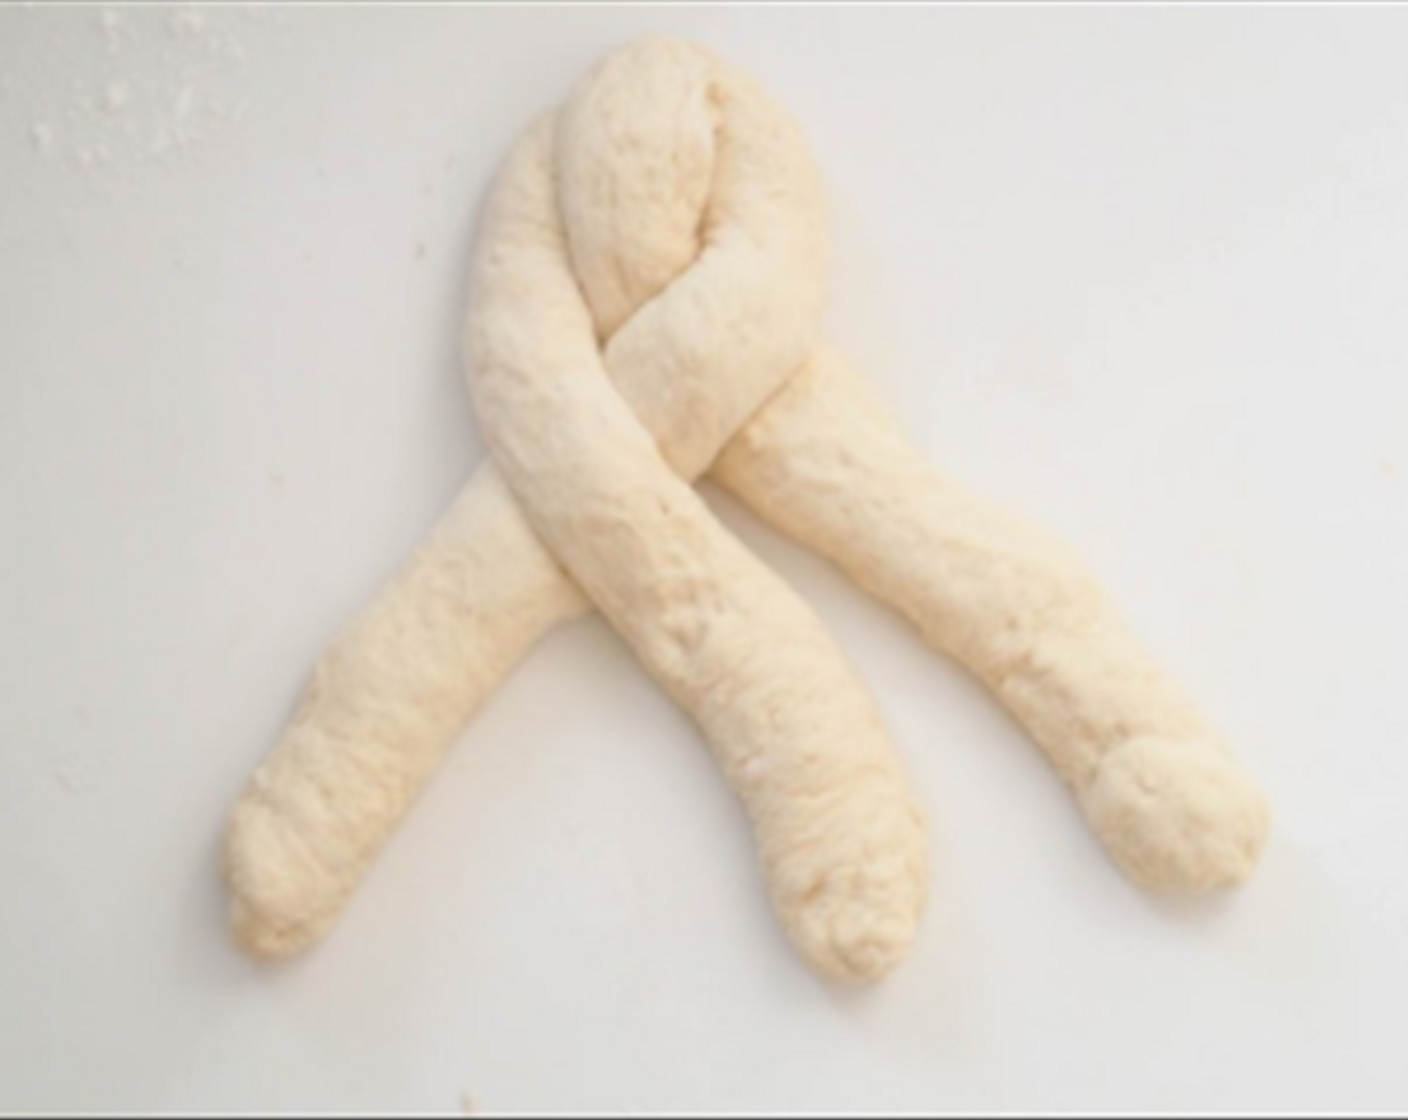 step 5 Punch down the dough to release the air. Transfer the dough to a clean floured surface then divide into 3 equal portions. Form each dough into a strand (about 12 inch long) and braid them together. Place the braided dough in the prepared baking pan.